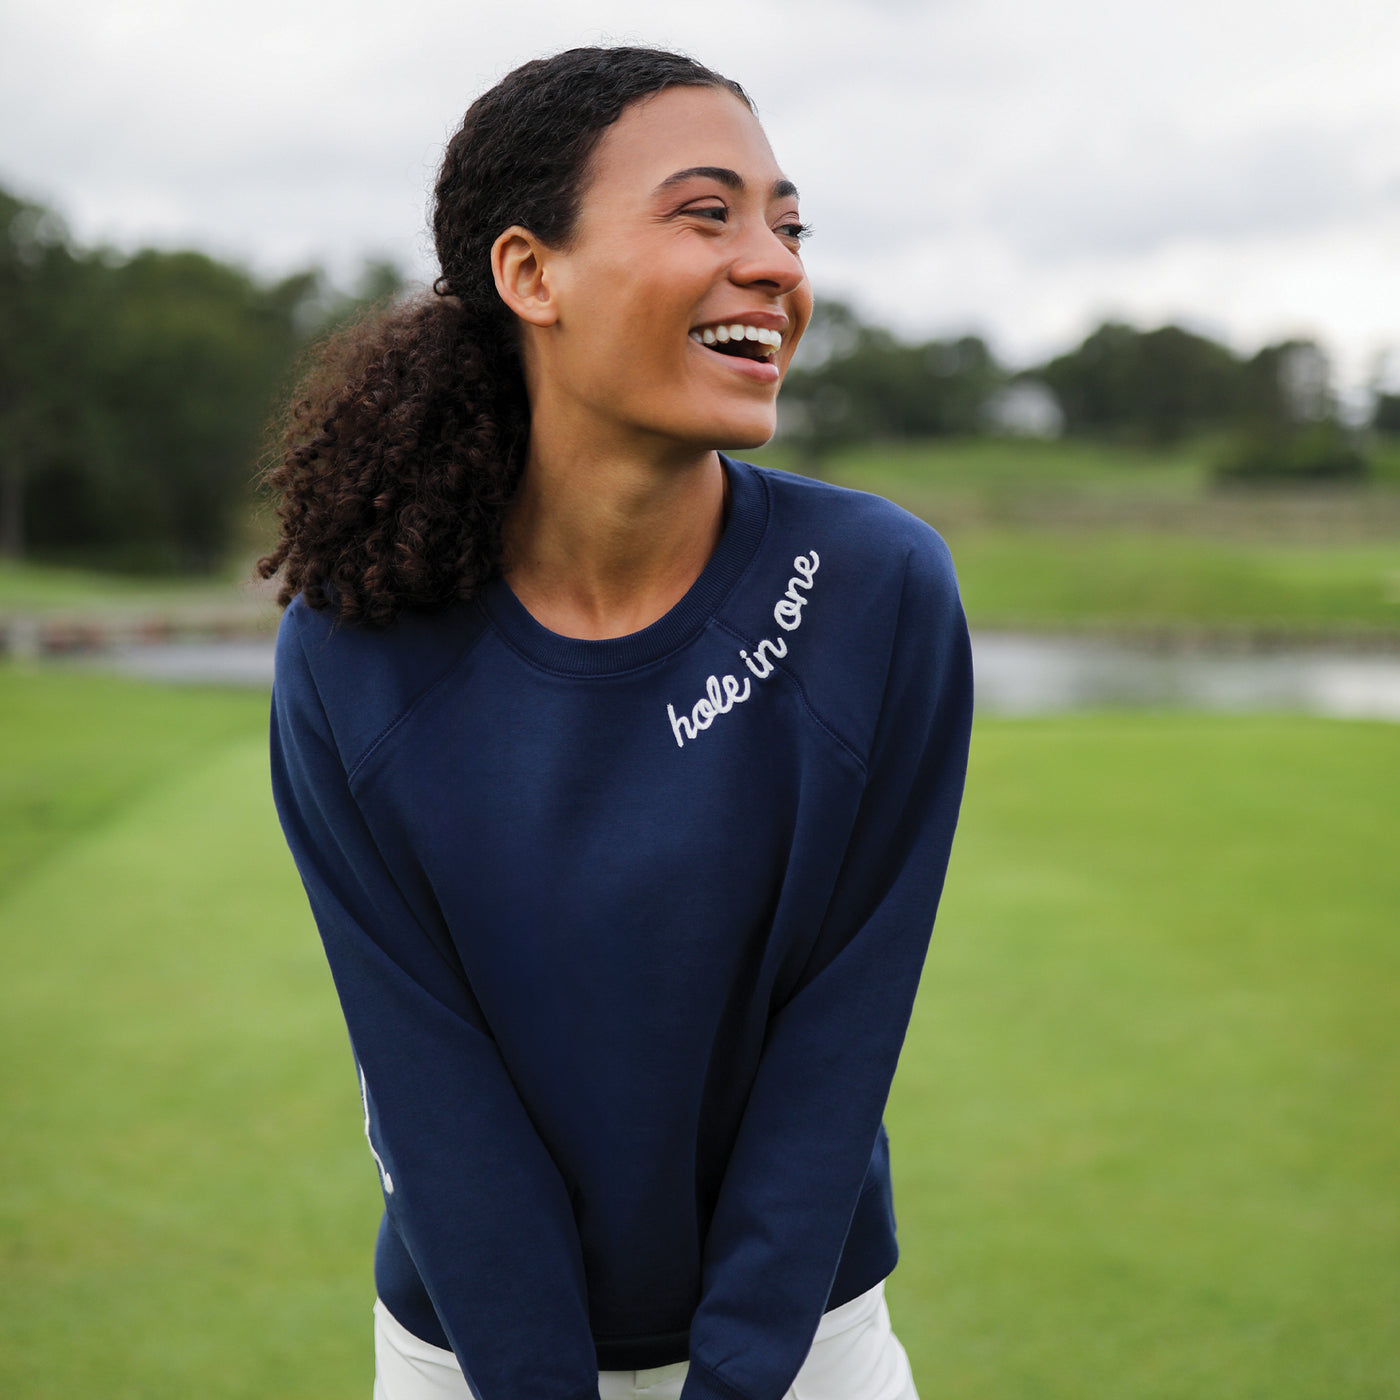 Navy womens cotton sweatshirt with "hold in one" in white cursive font embroidered on the neckline and white crossed golf clubs embroidered on the elbows.